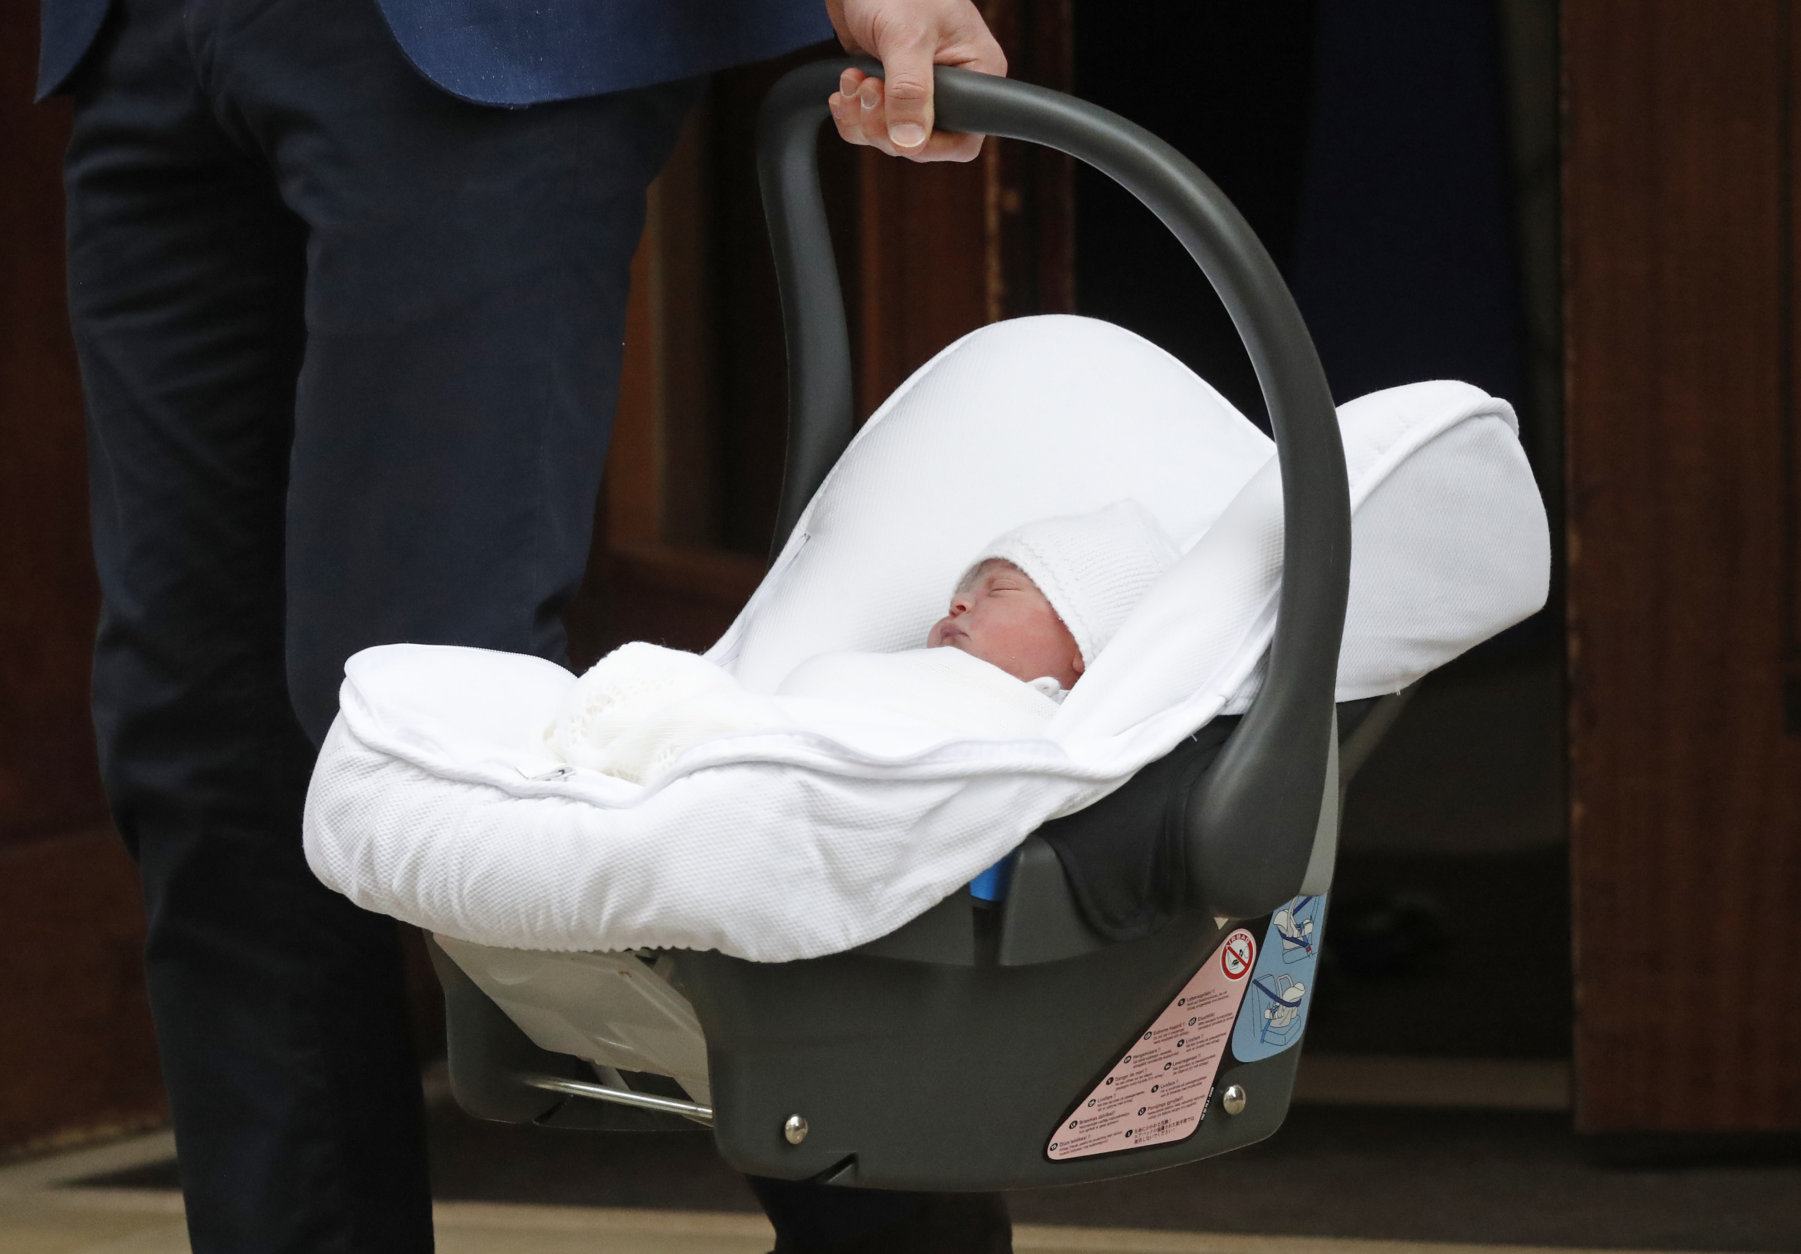 Britain's Prince William carries his newborn baby son as he leaves the Lindo wing at St Mary's Hospital in London London, Monday, April 23, 2018. The Duchess of Cambridge gave birth Monday to a healthy baby boy — a third child for Kate and Prince William and fifth in line to the British throne. (AP Photo/Frank Augstein)